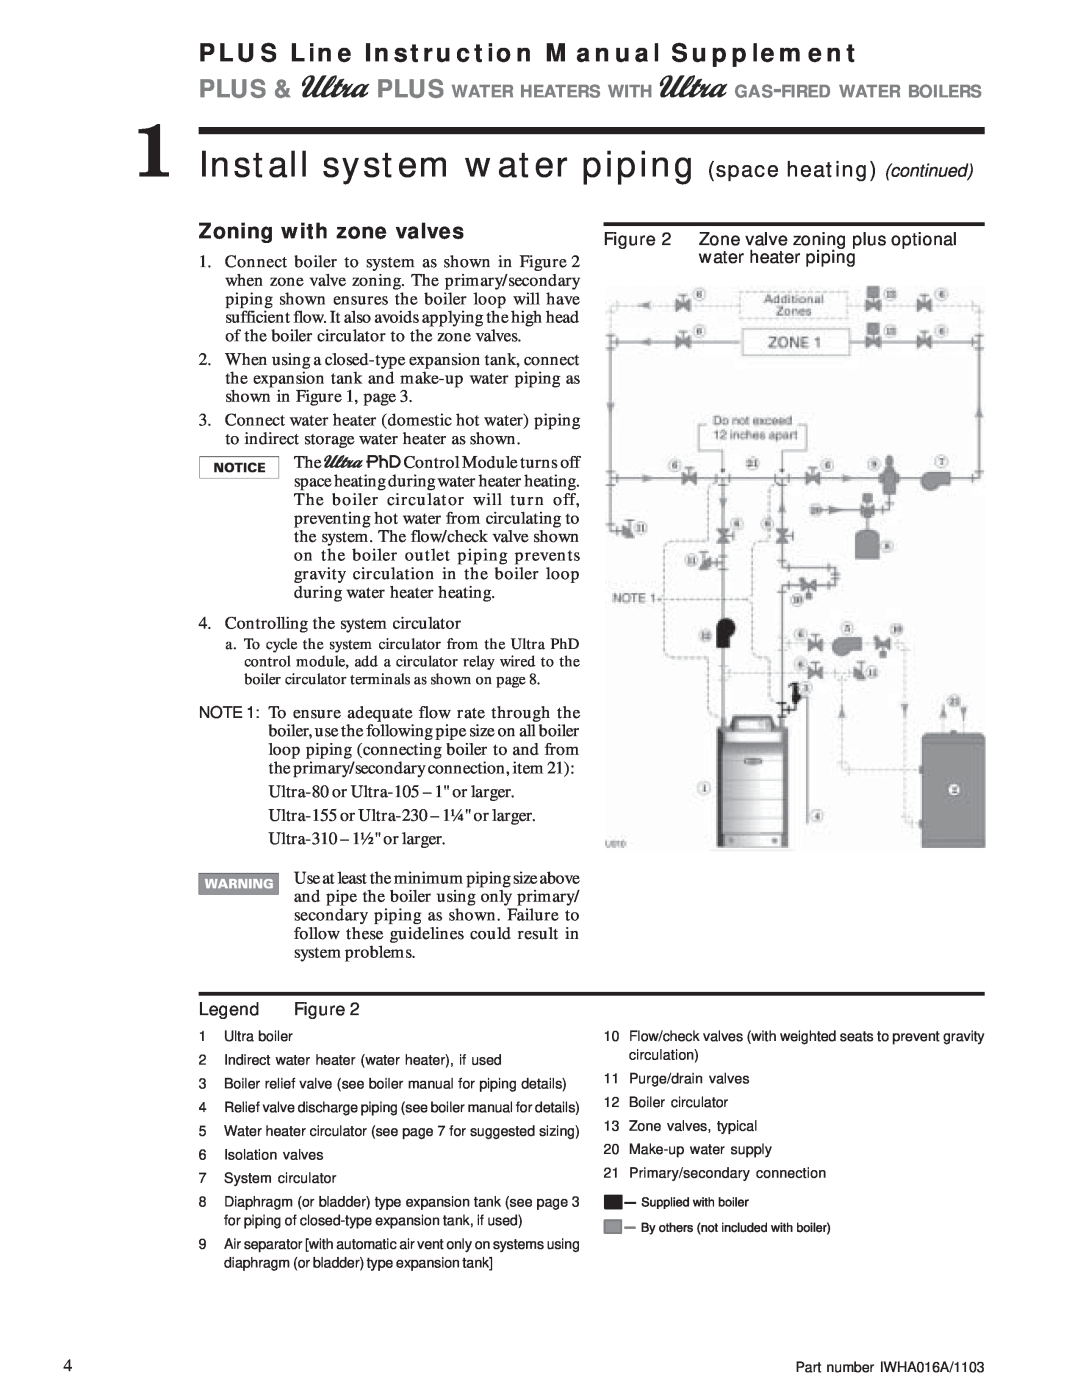 Weil-McLain Electric Water Heater Install system water piping space heating continued, Zoning with zone valves 